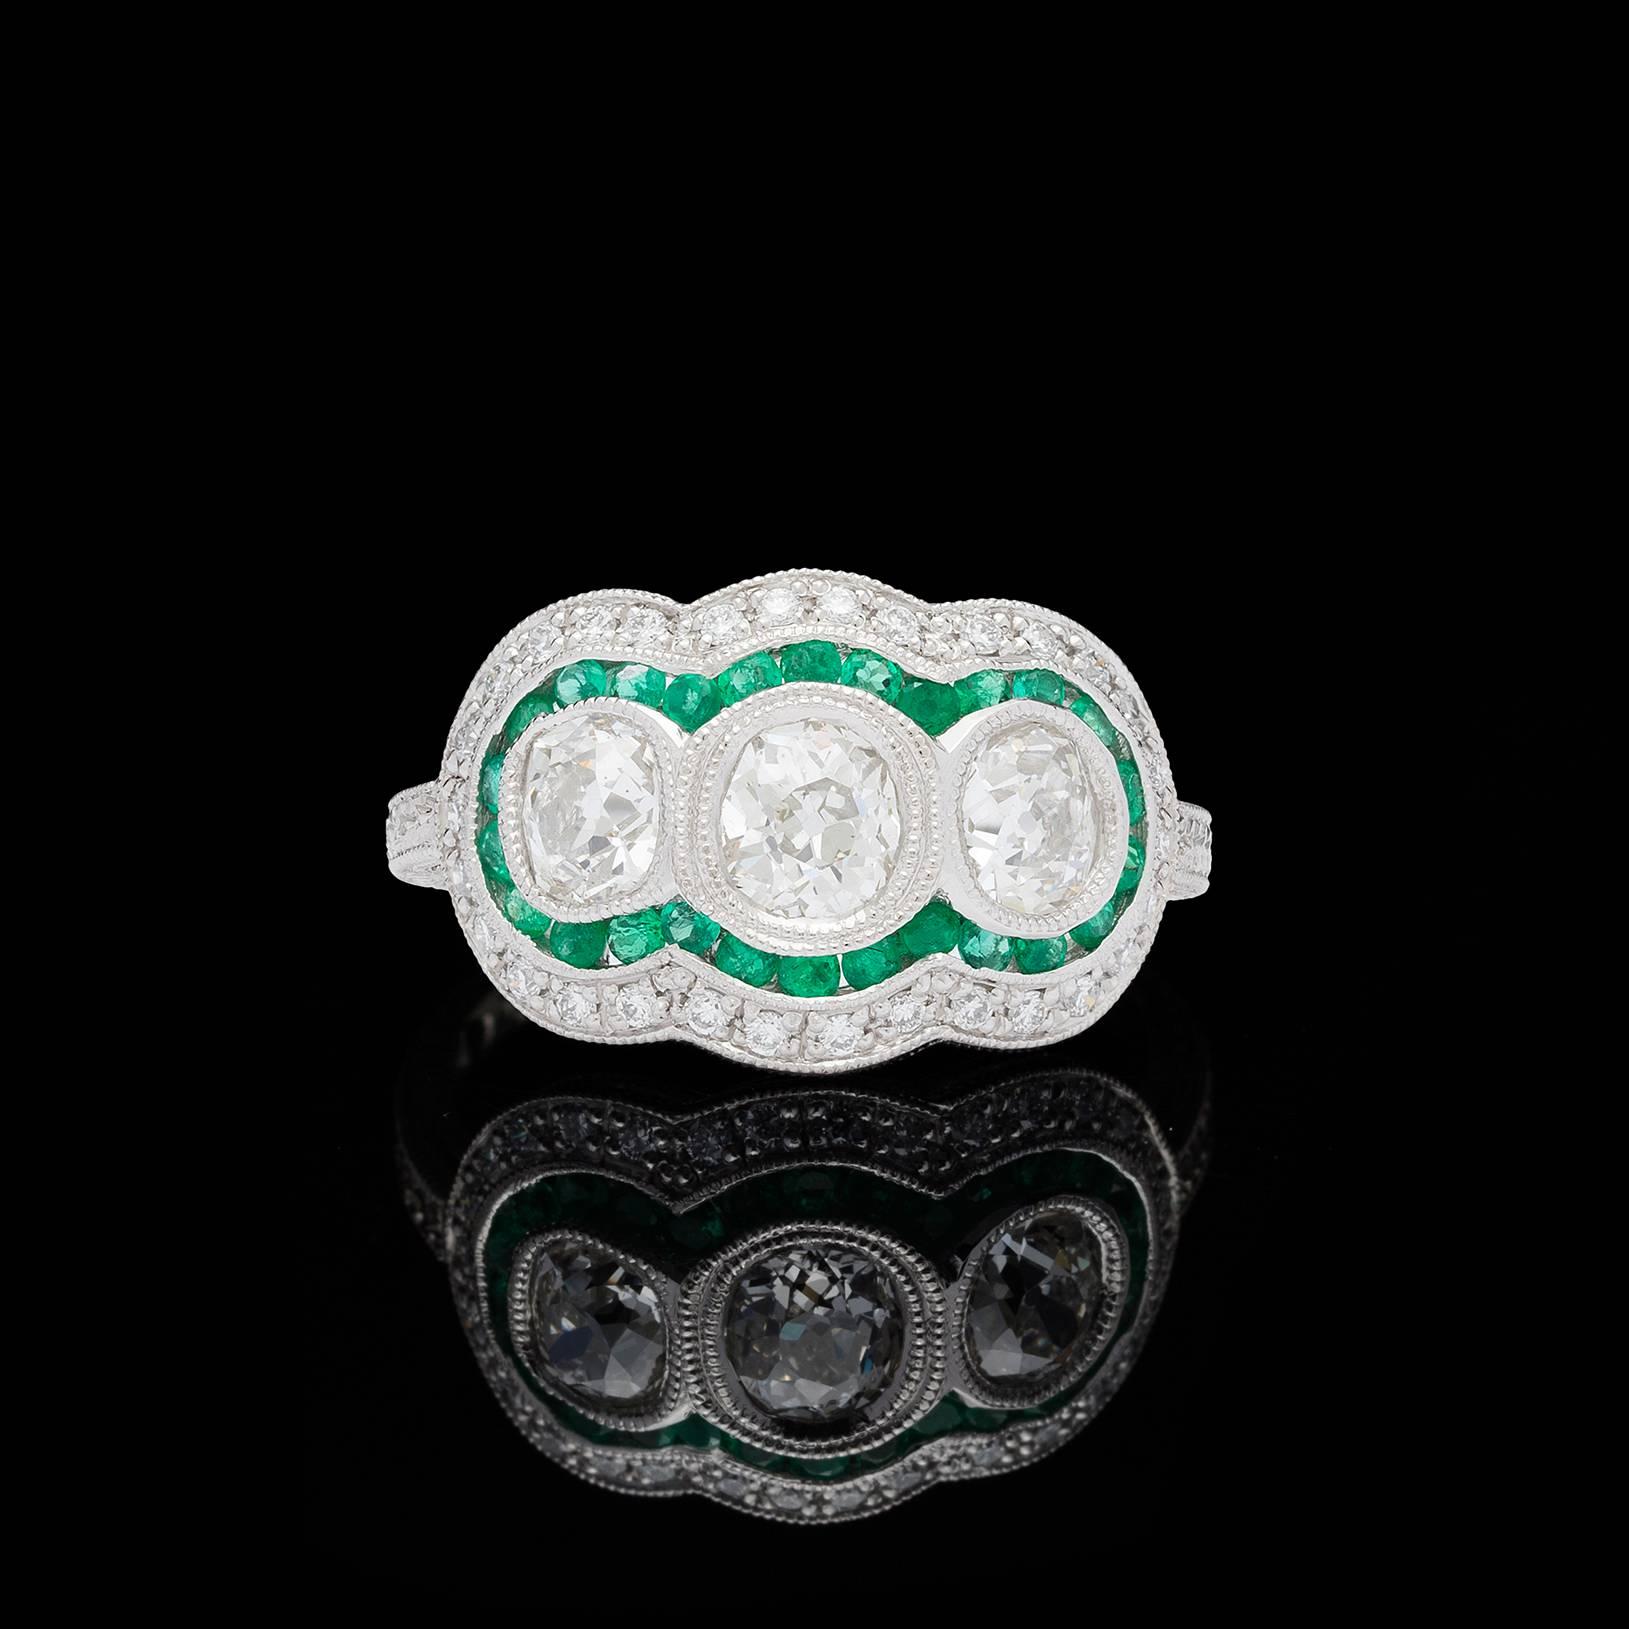 Three re-purposed antique old mine cut diamonds totaling 1.34 carat (J-K & VS-SI) set in an intricate platinum Edwardian style custom setting. A halo of 27 round cut emeralds in a vibrant green color accentuate the stones along with an additional 30